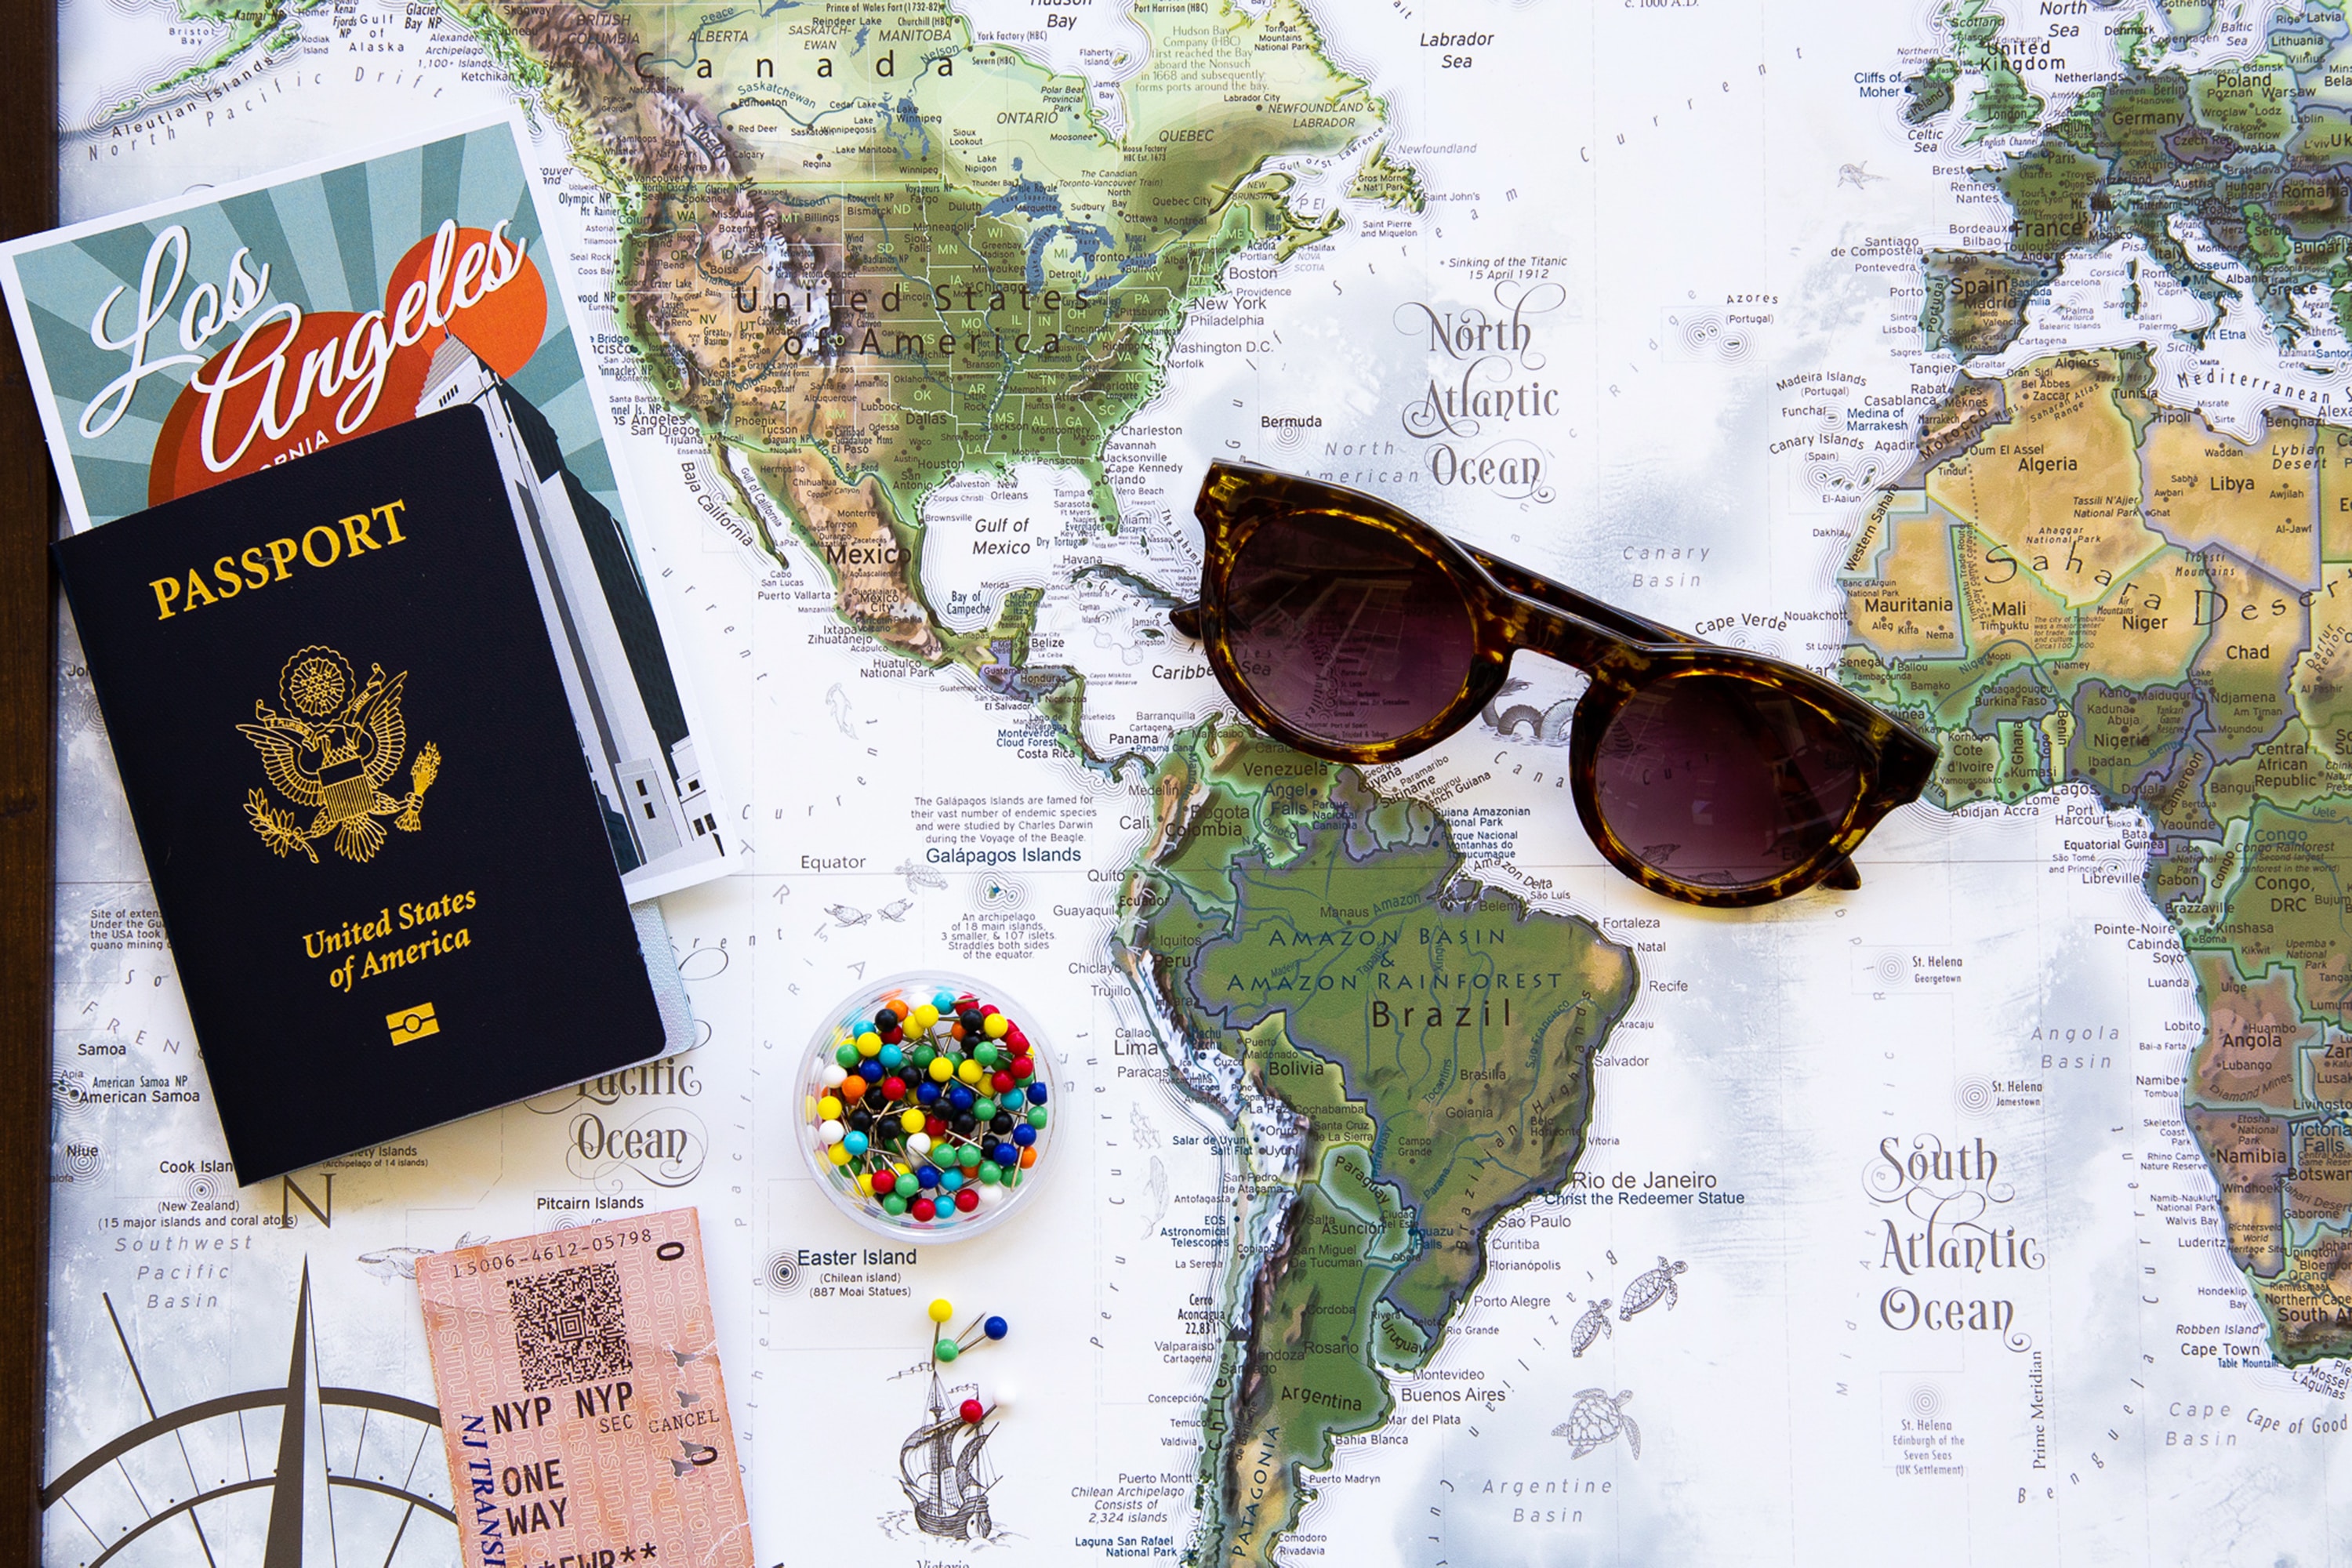 A picture of a passport with a map behind it.  Also in the picture are a part of sunglasses and a cup of pins as though a traveler is using the passport to visit places marked by pins.